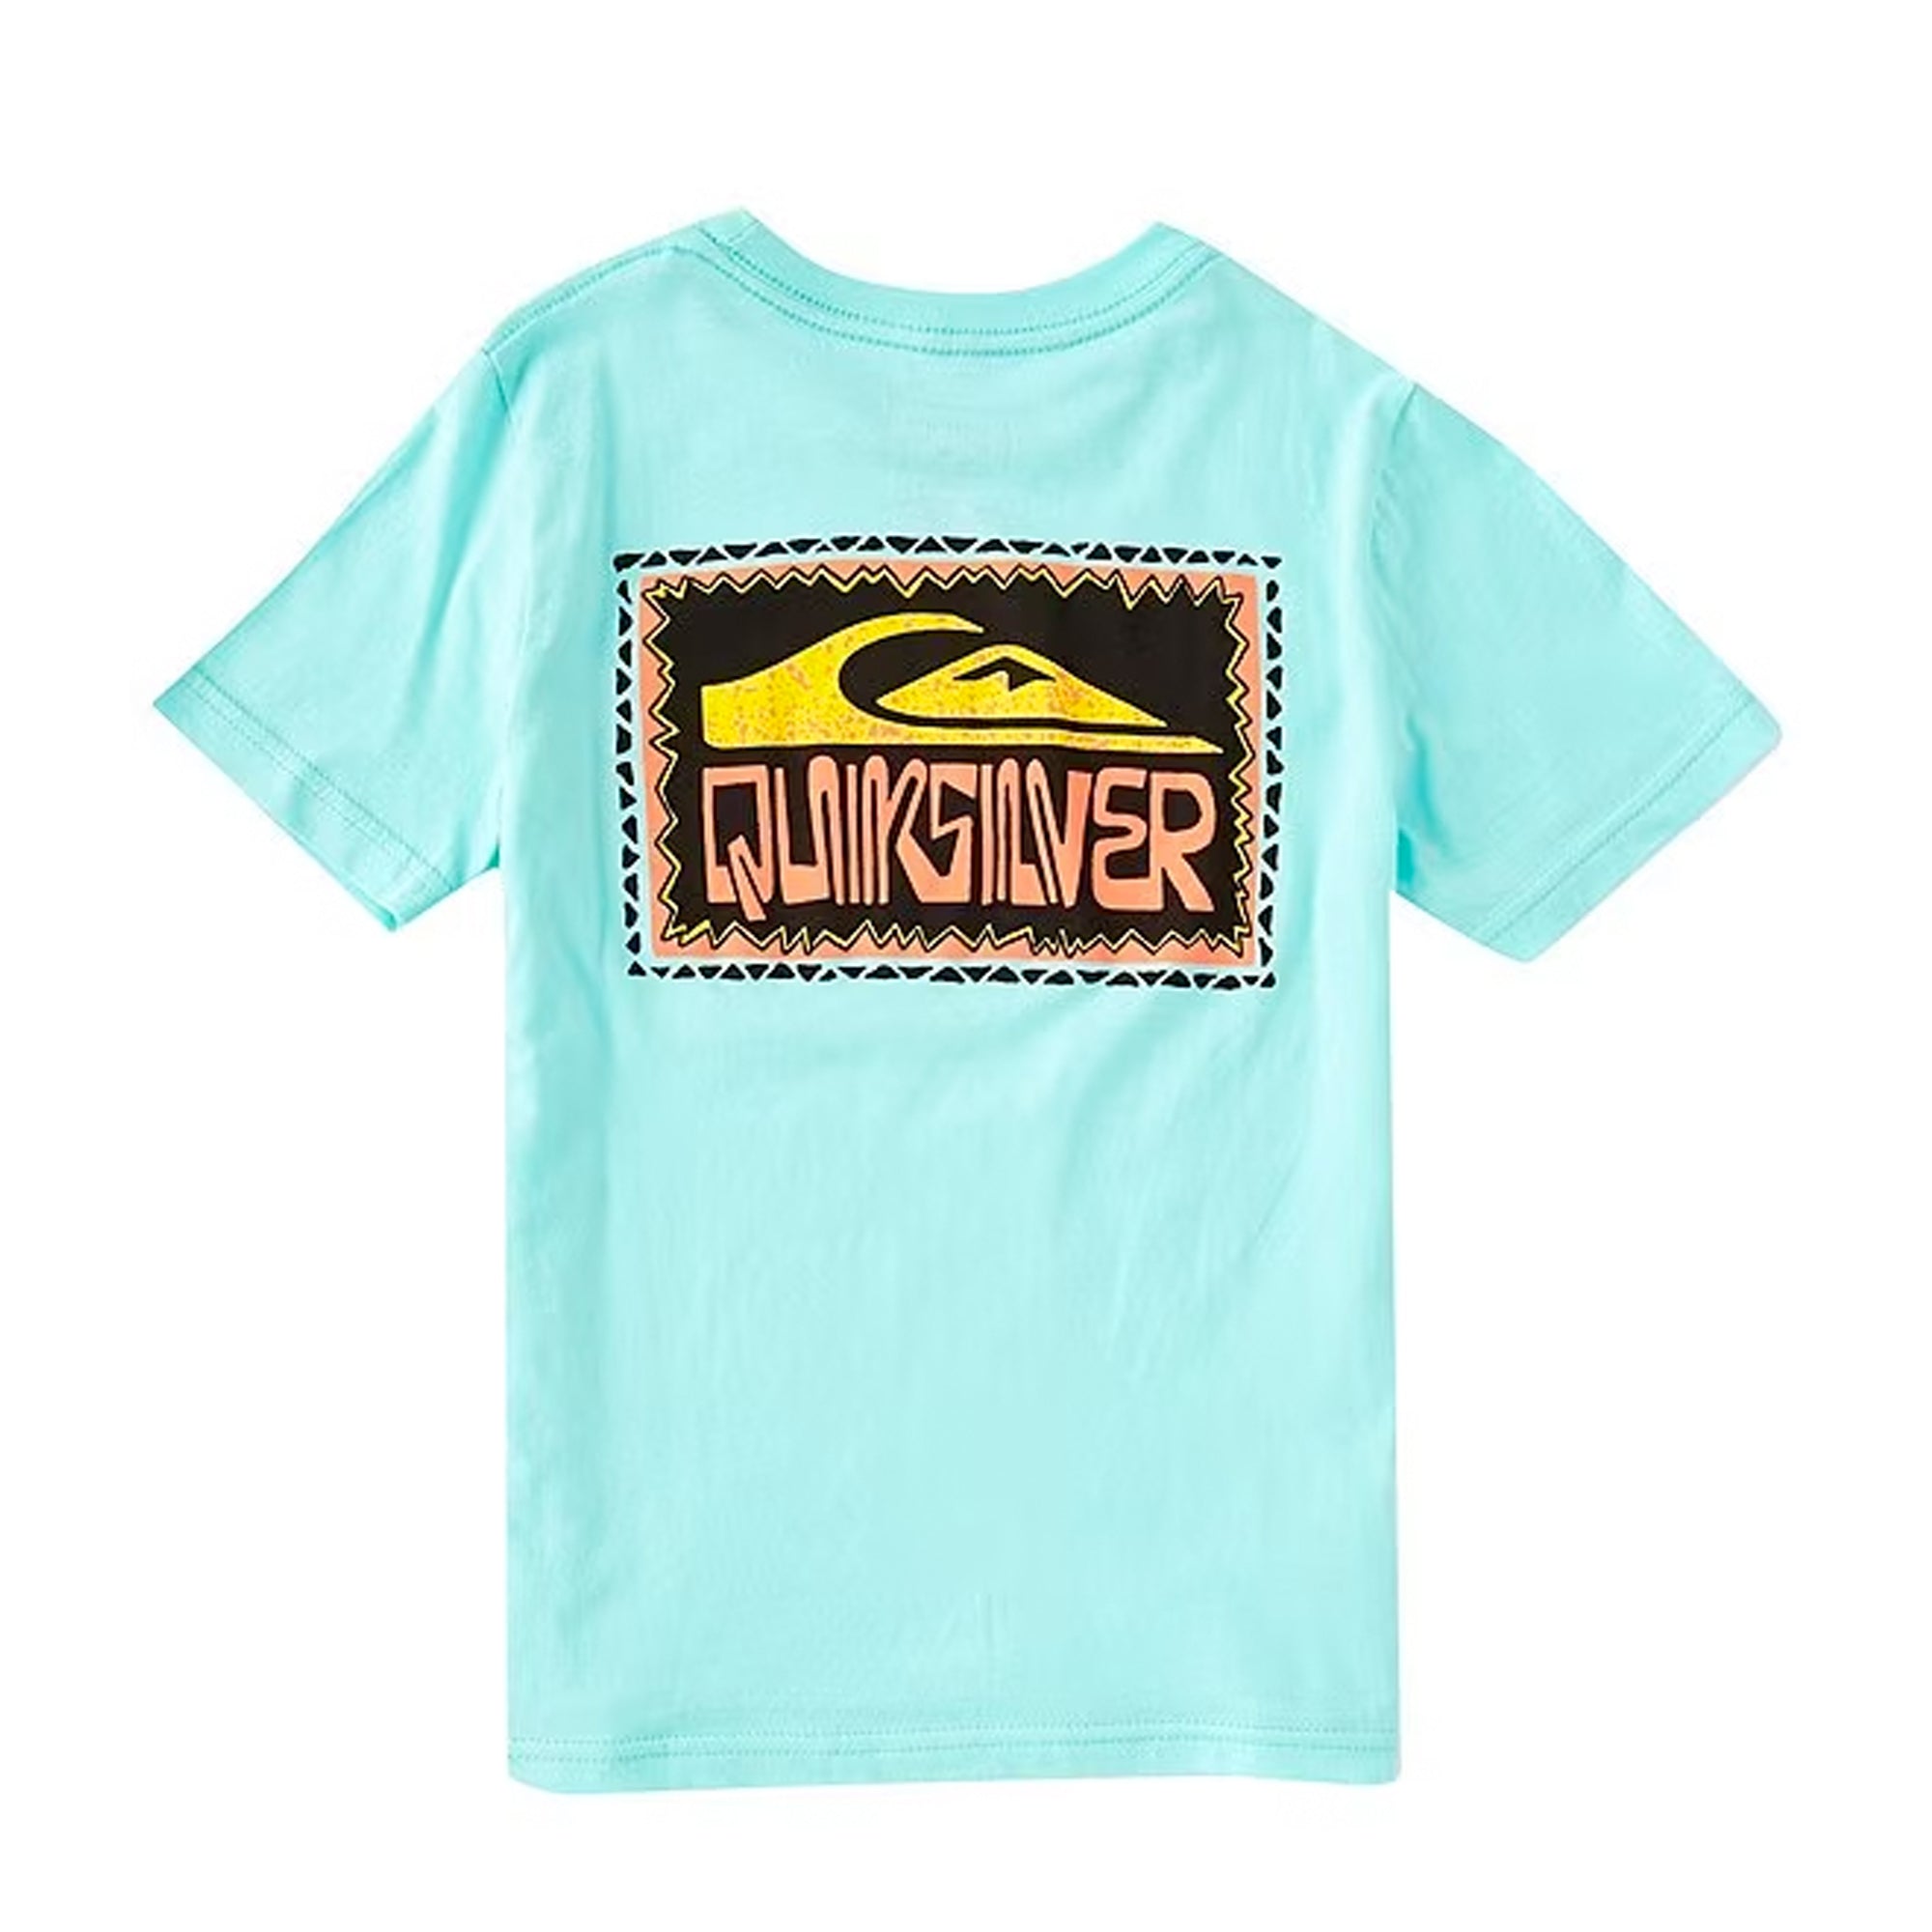 Quiksilver Warped Frames Youth Boys S/S T-Shirt